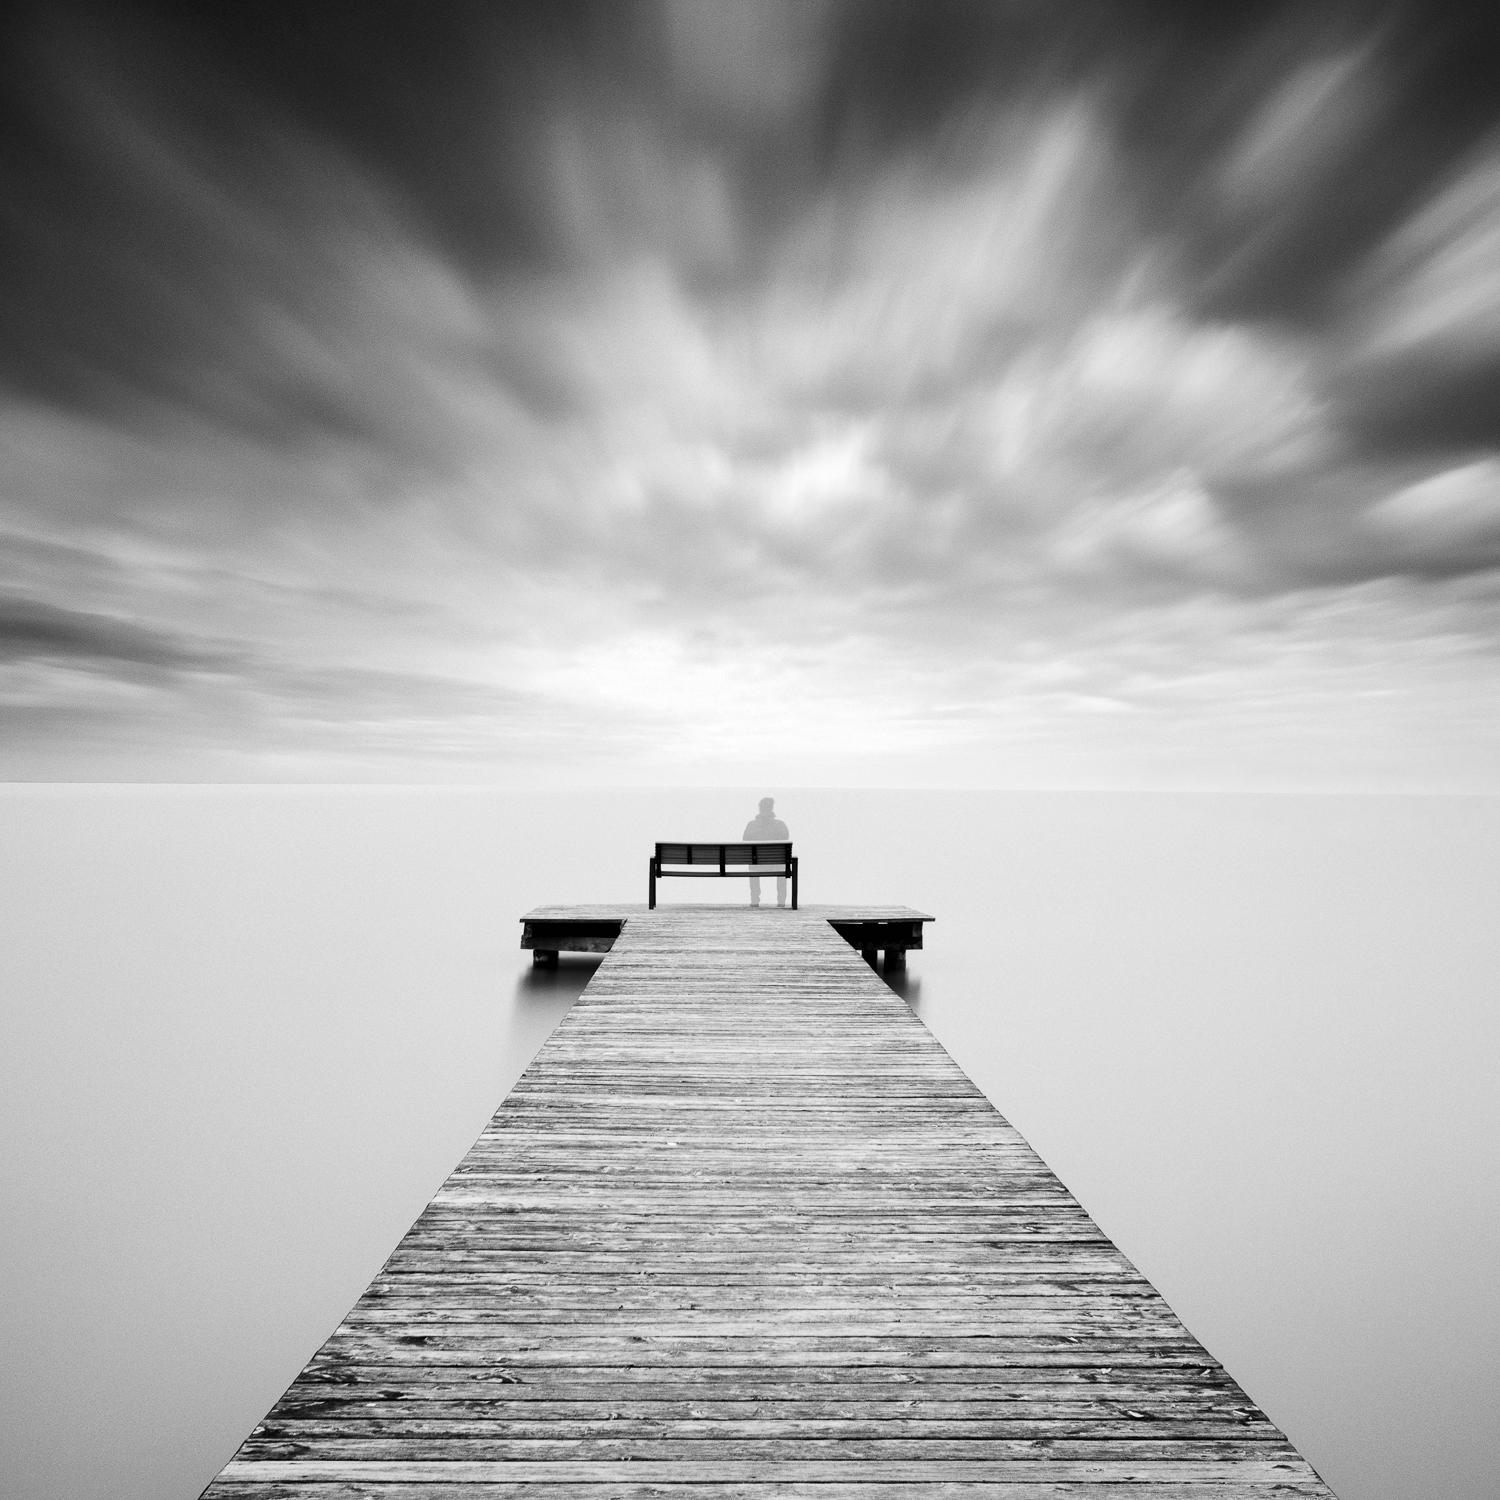 Self Portrait, Pier, Austria, black and white gelatin silver photography, framed - Photograph by Gerald Berghammer